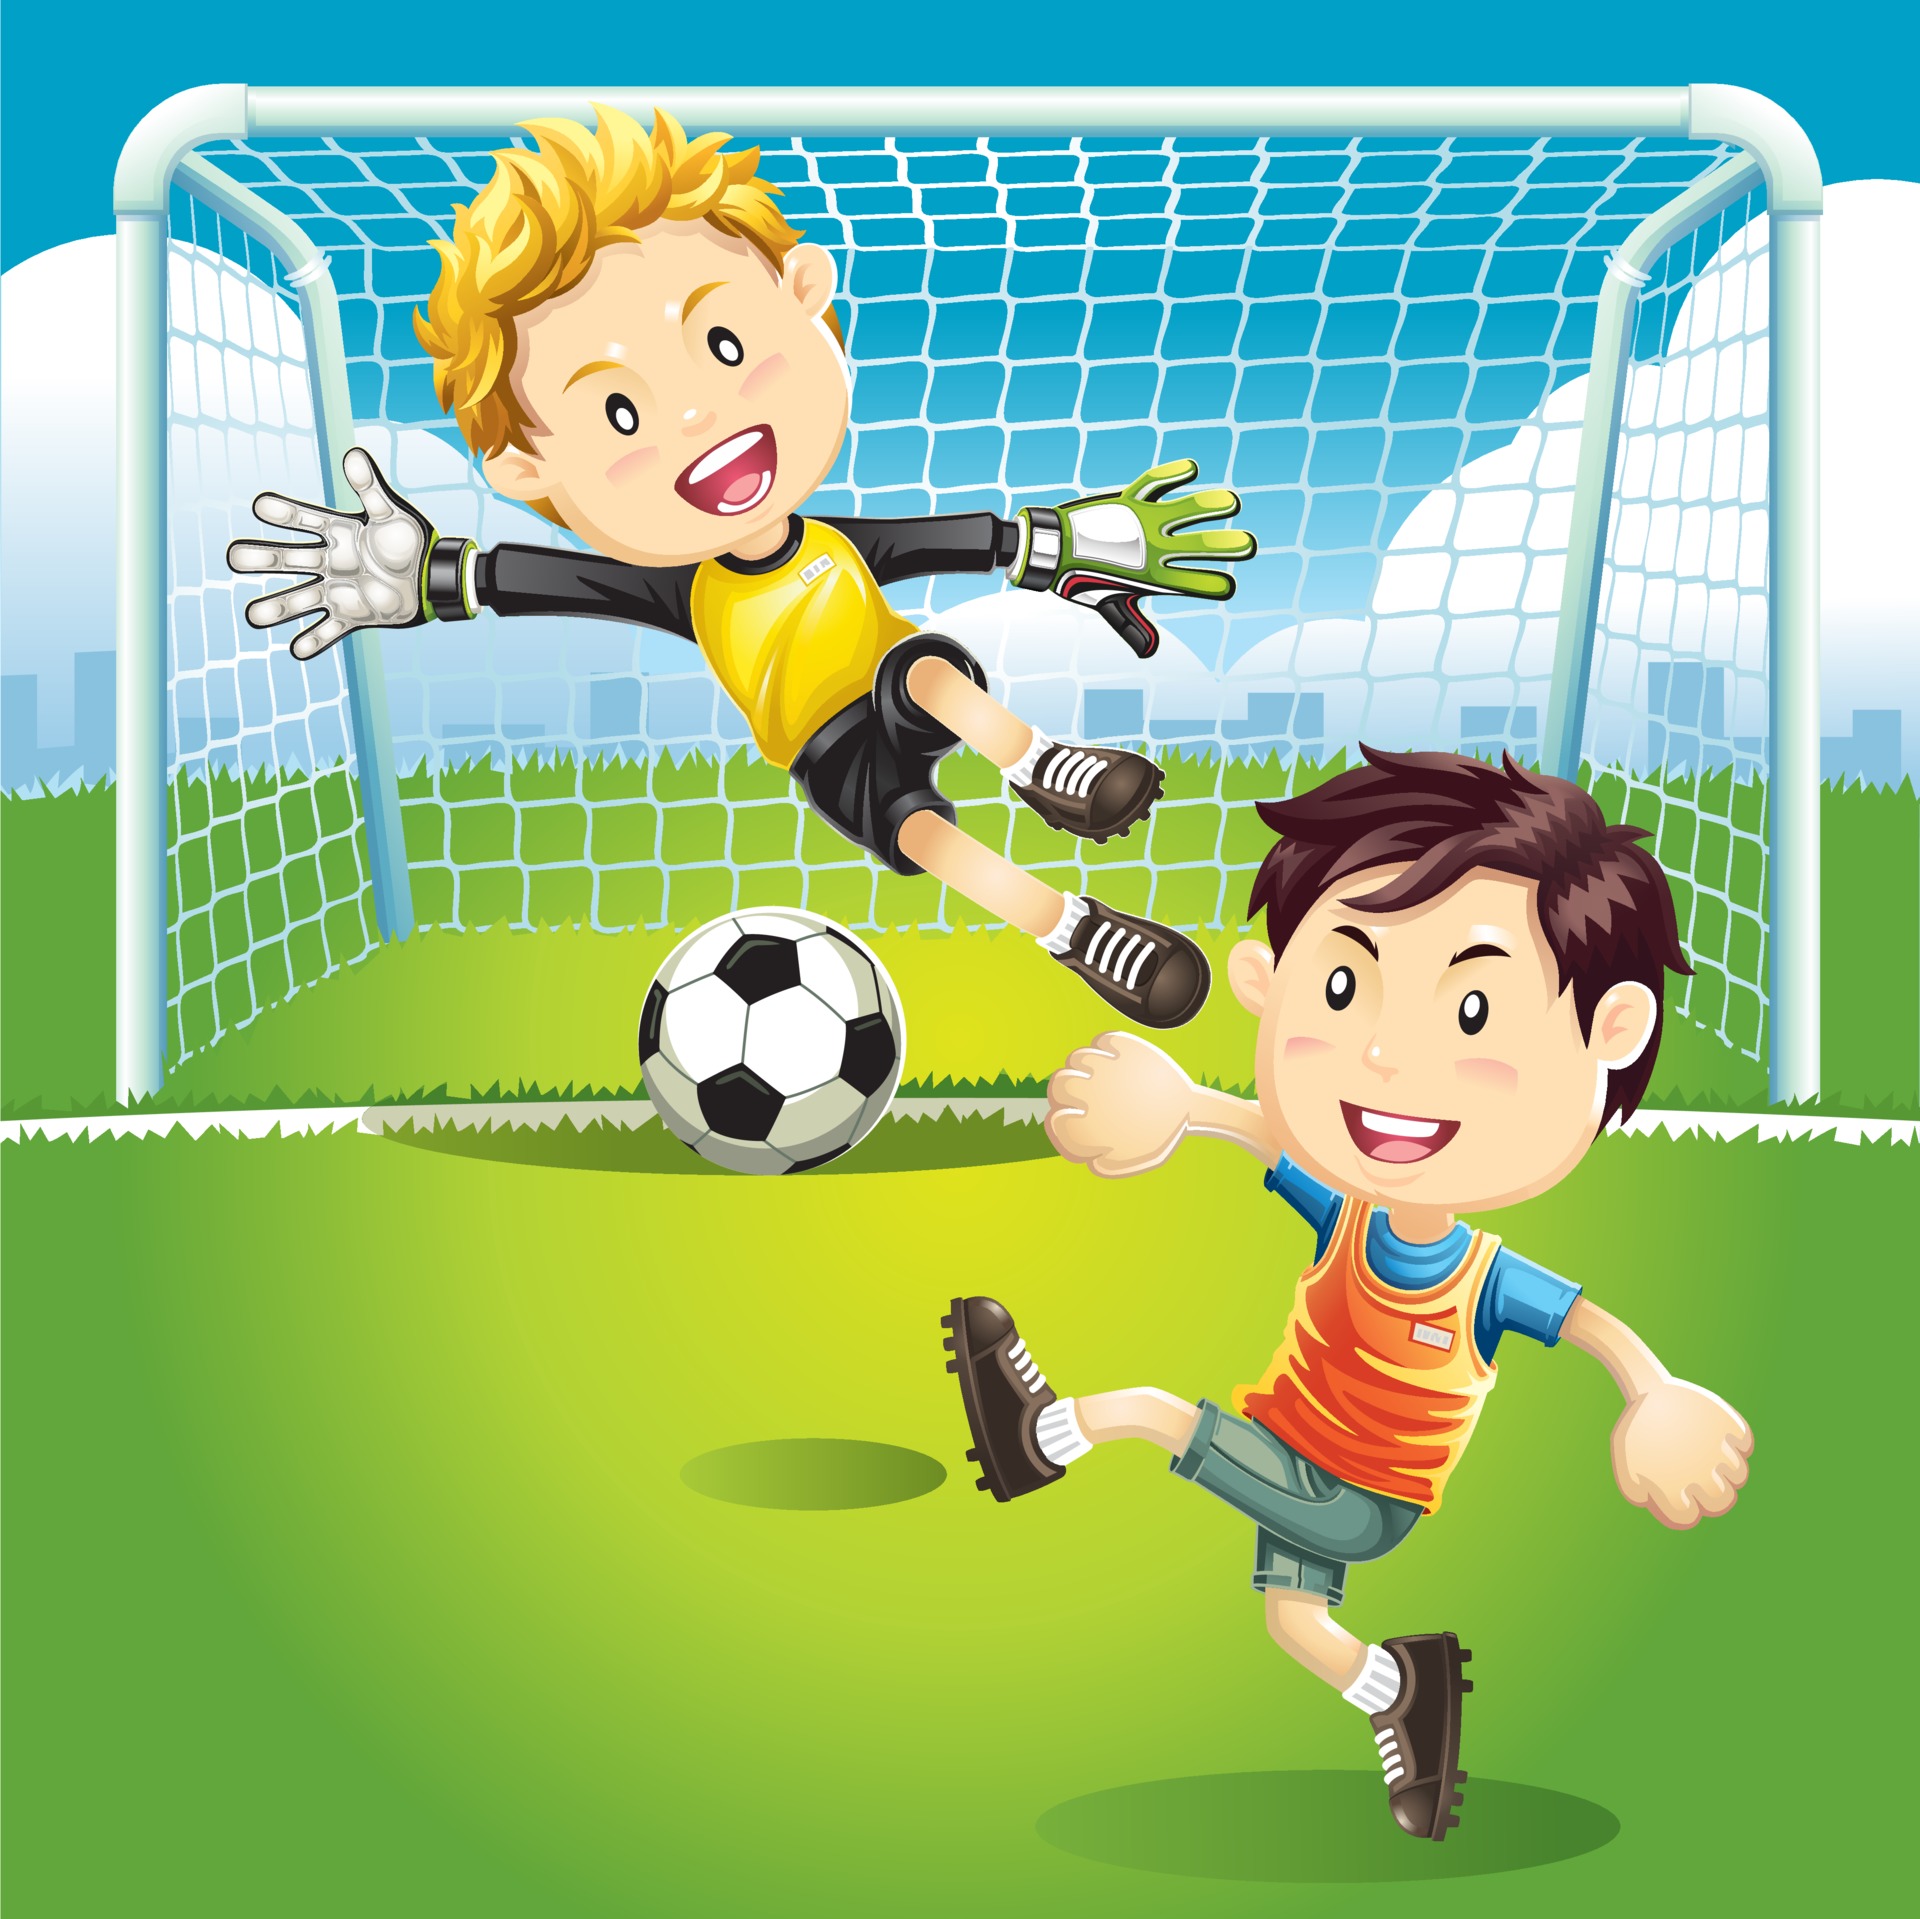 https://static.vecteezy.com/system/resources/previews/001/941/181/original/children-playing-soccer-outdoors-vector.jpg